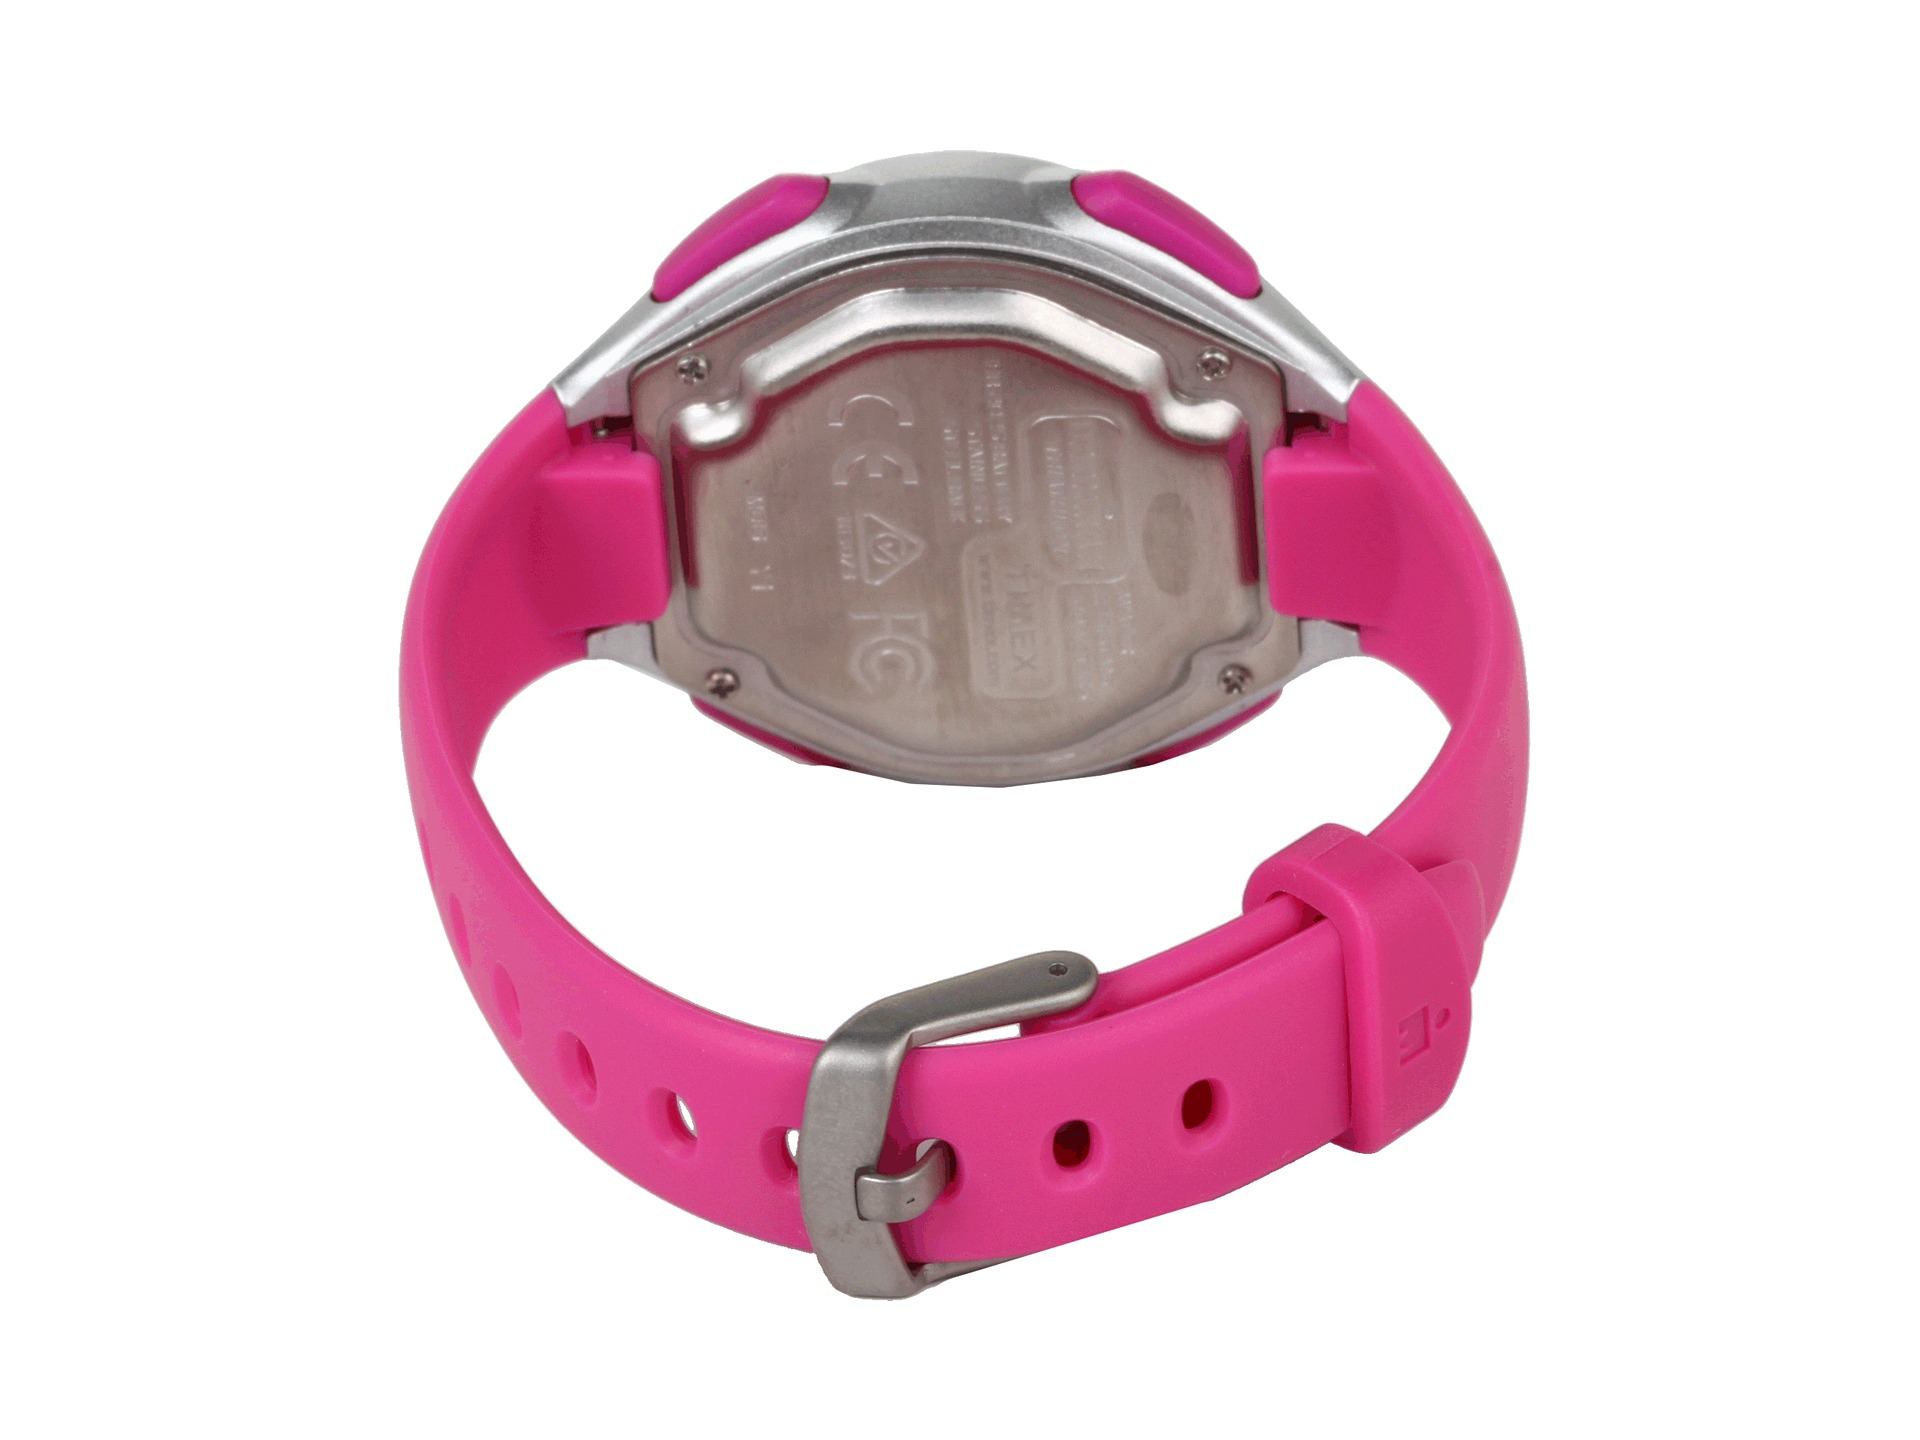 Timex Ironman Road Trainer Heart Rate Monitor Pink Silver Tone Resin Strap Watch